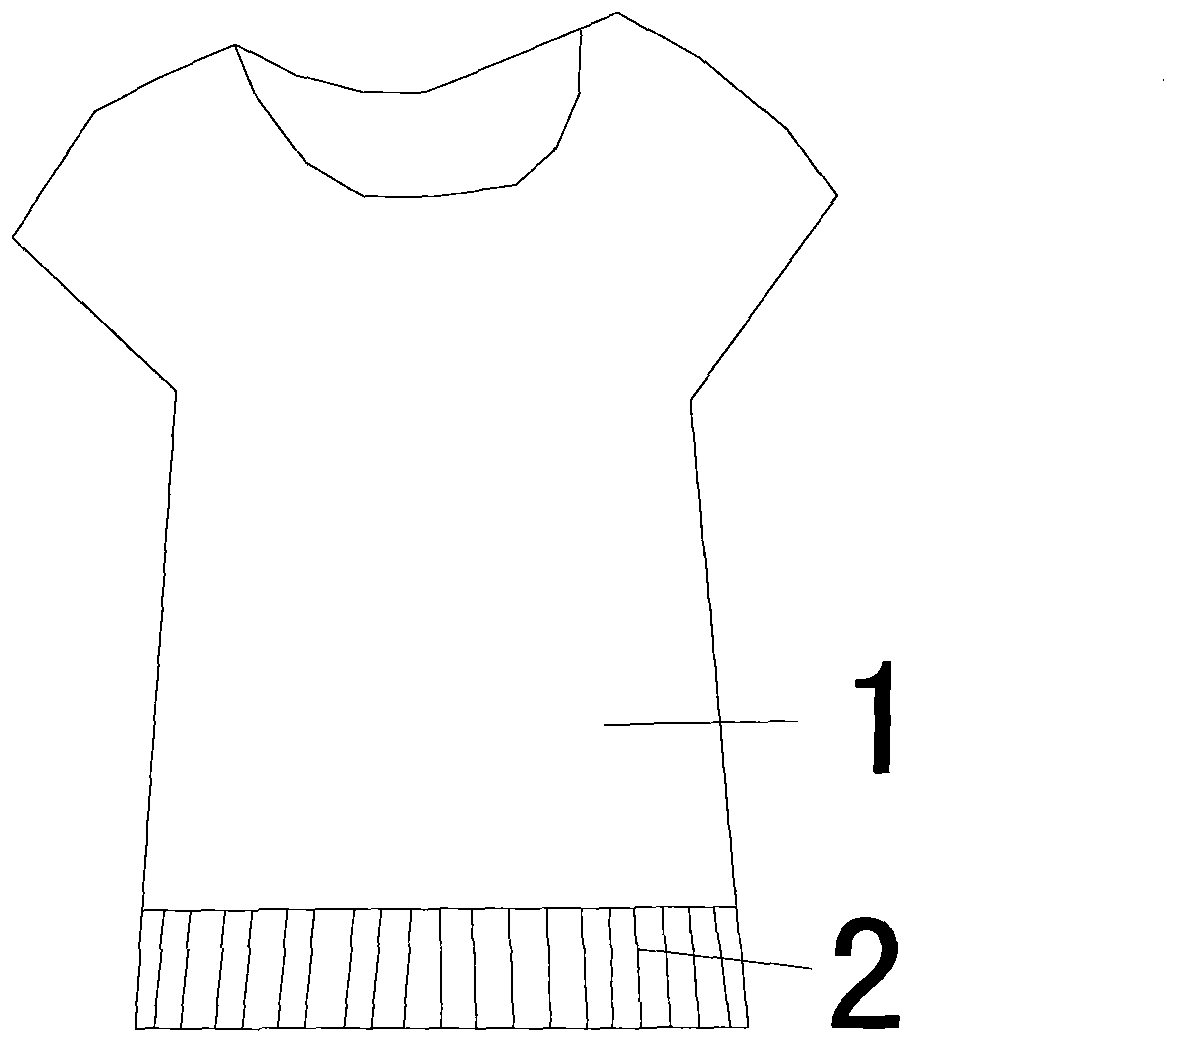 Soft short-sleeved shirt easy to wrap and provided with rubber bands